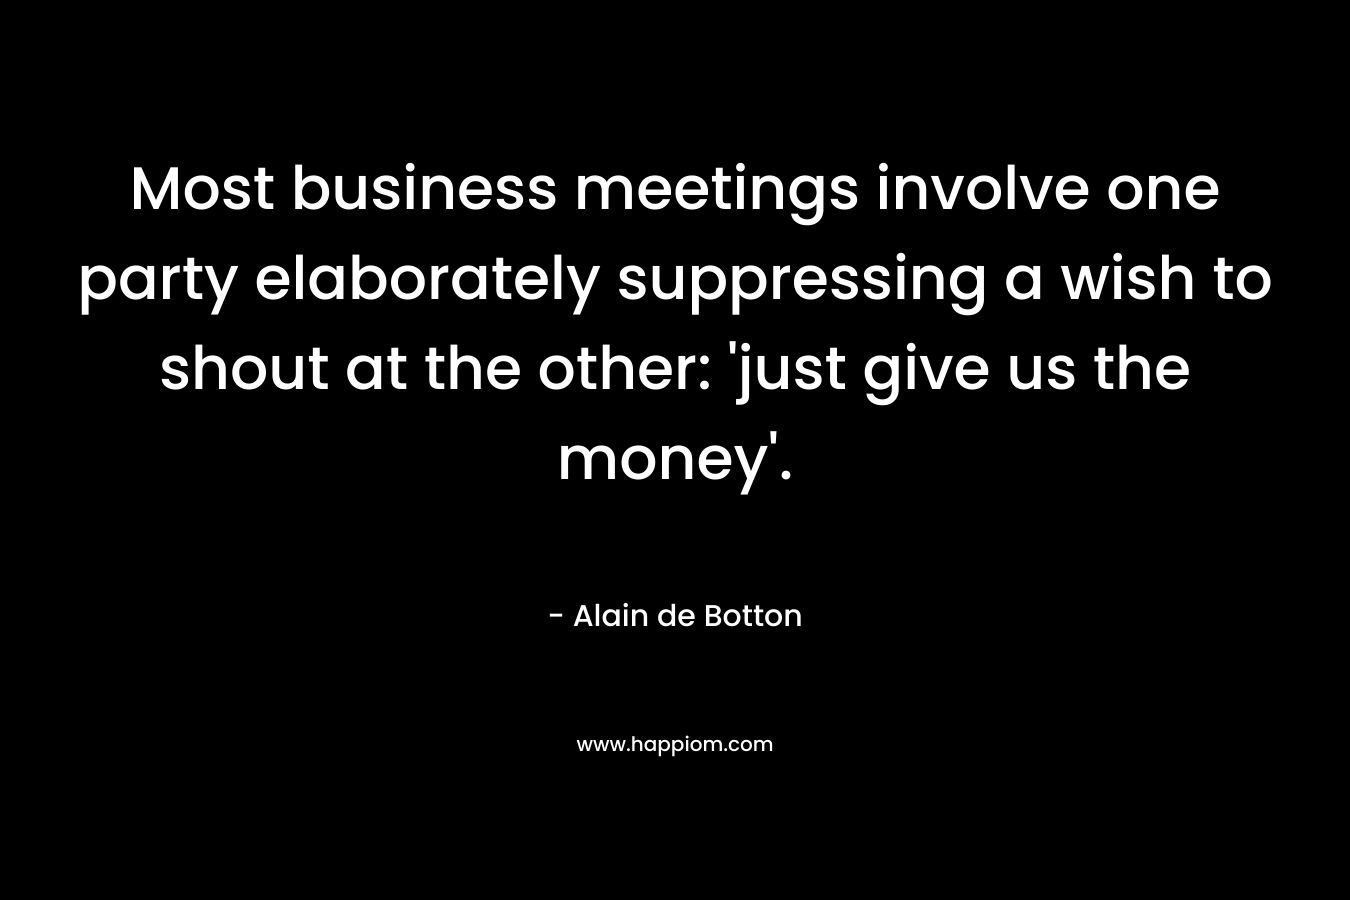 Most business meetings involve one party elaborately suppressing a wish to shout at the other: 'just give us the money'.